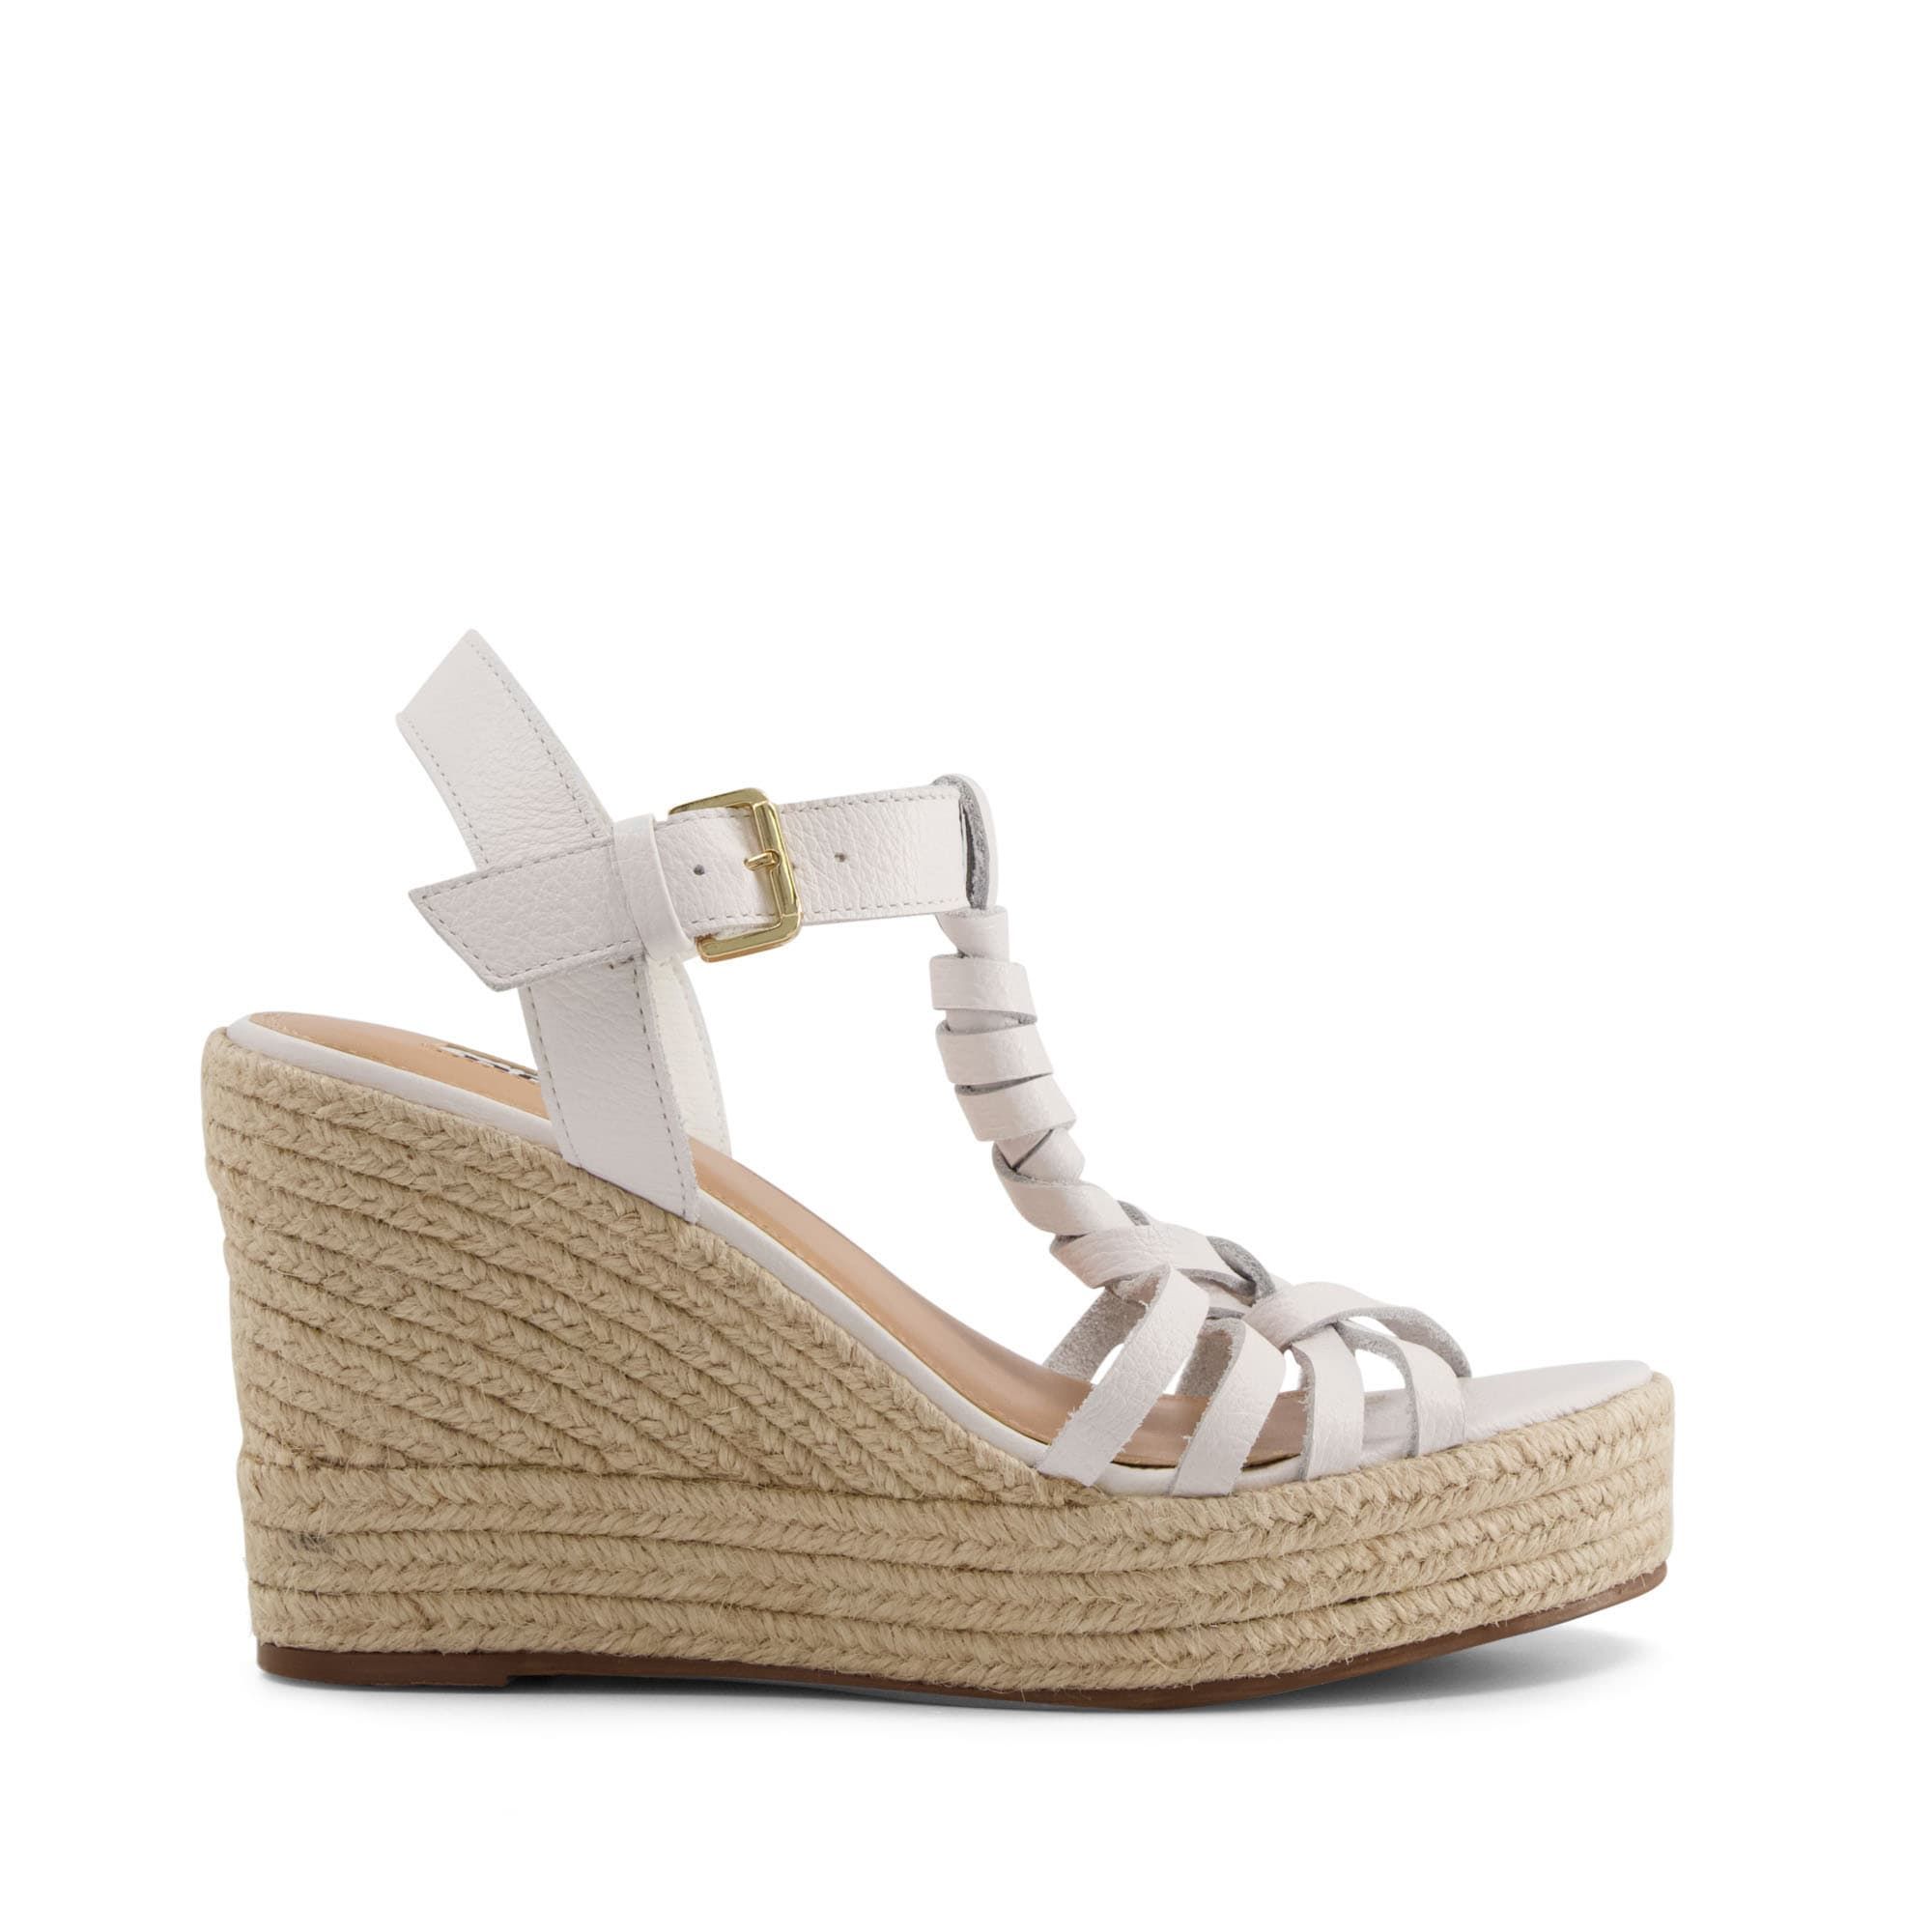 Reinvigorate your Summer wardrobe. The plaited leather twists on these sandals enhance the luxe artisan feel. They rest on natural raffia high wedges, grounded with rubber for grip.